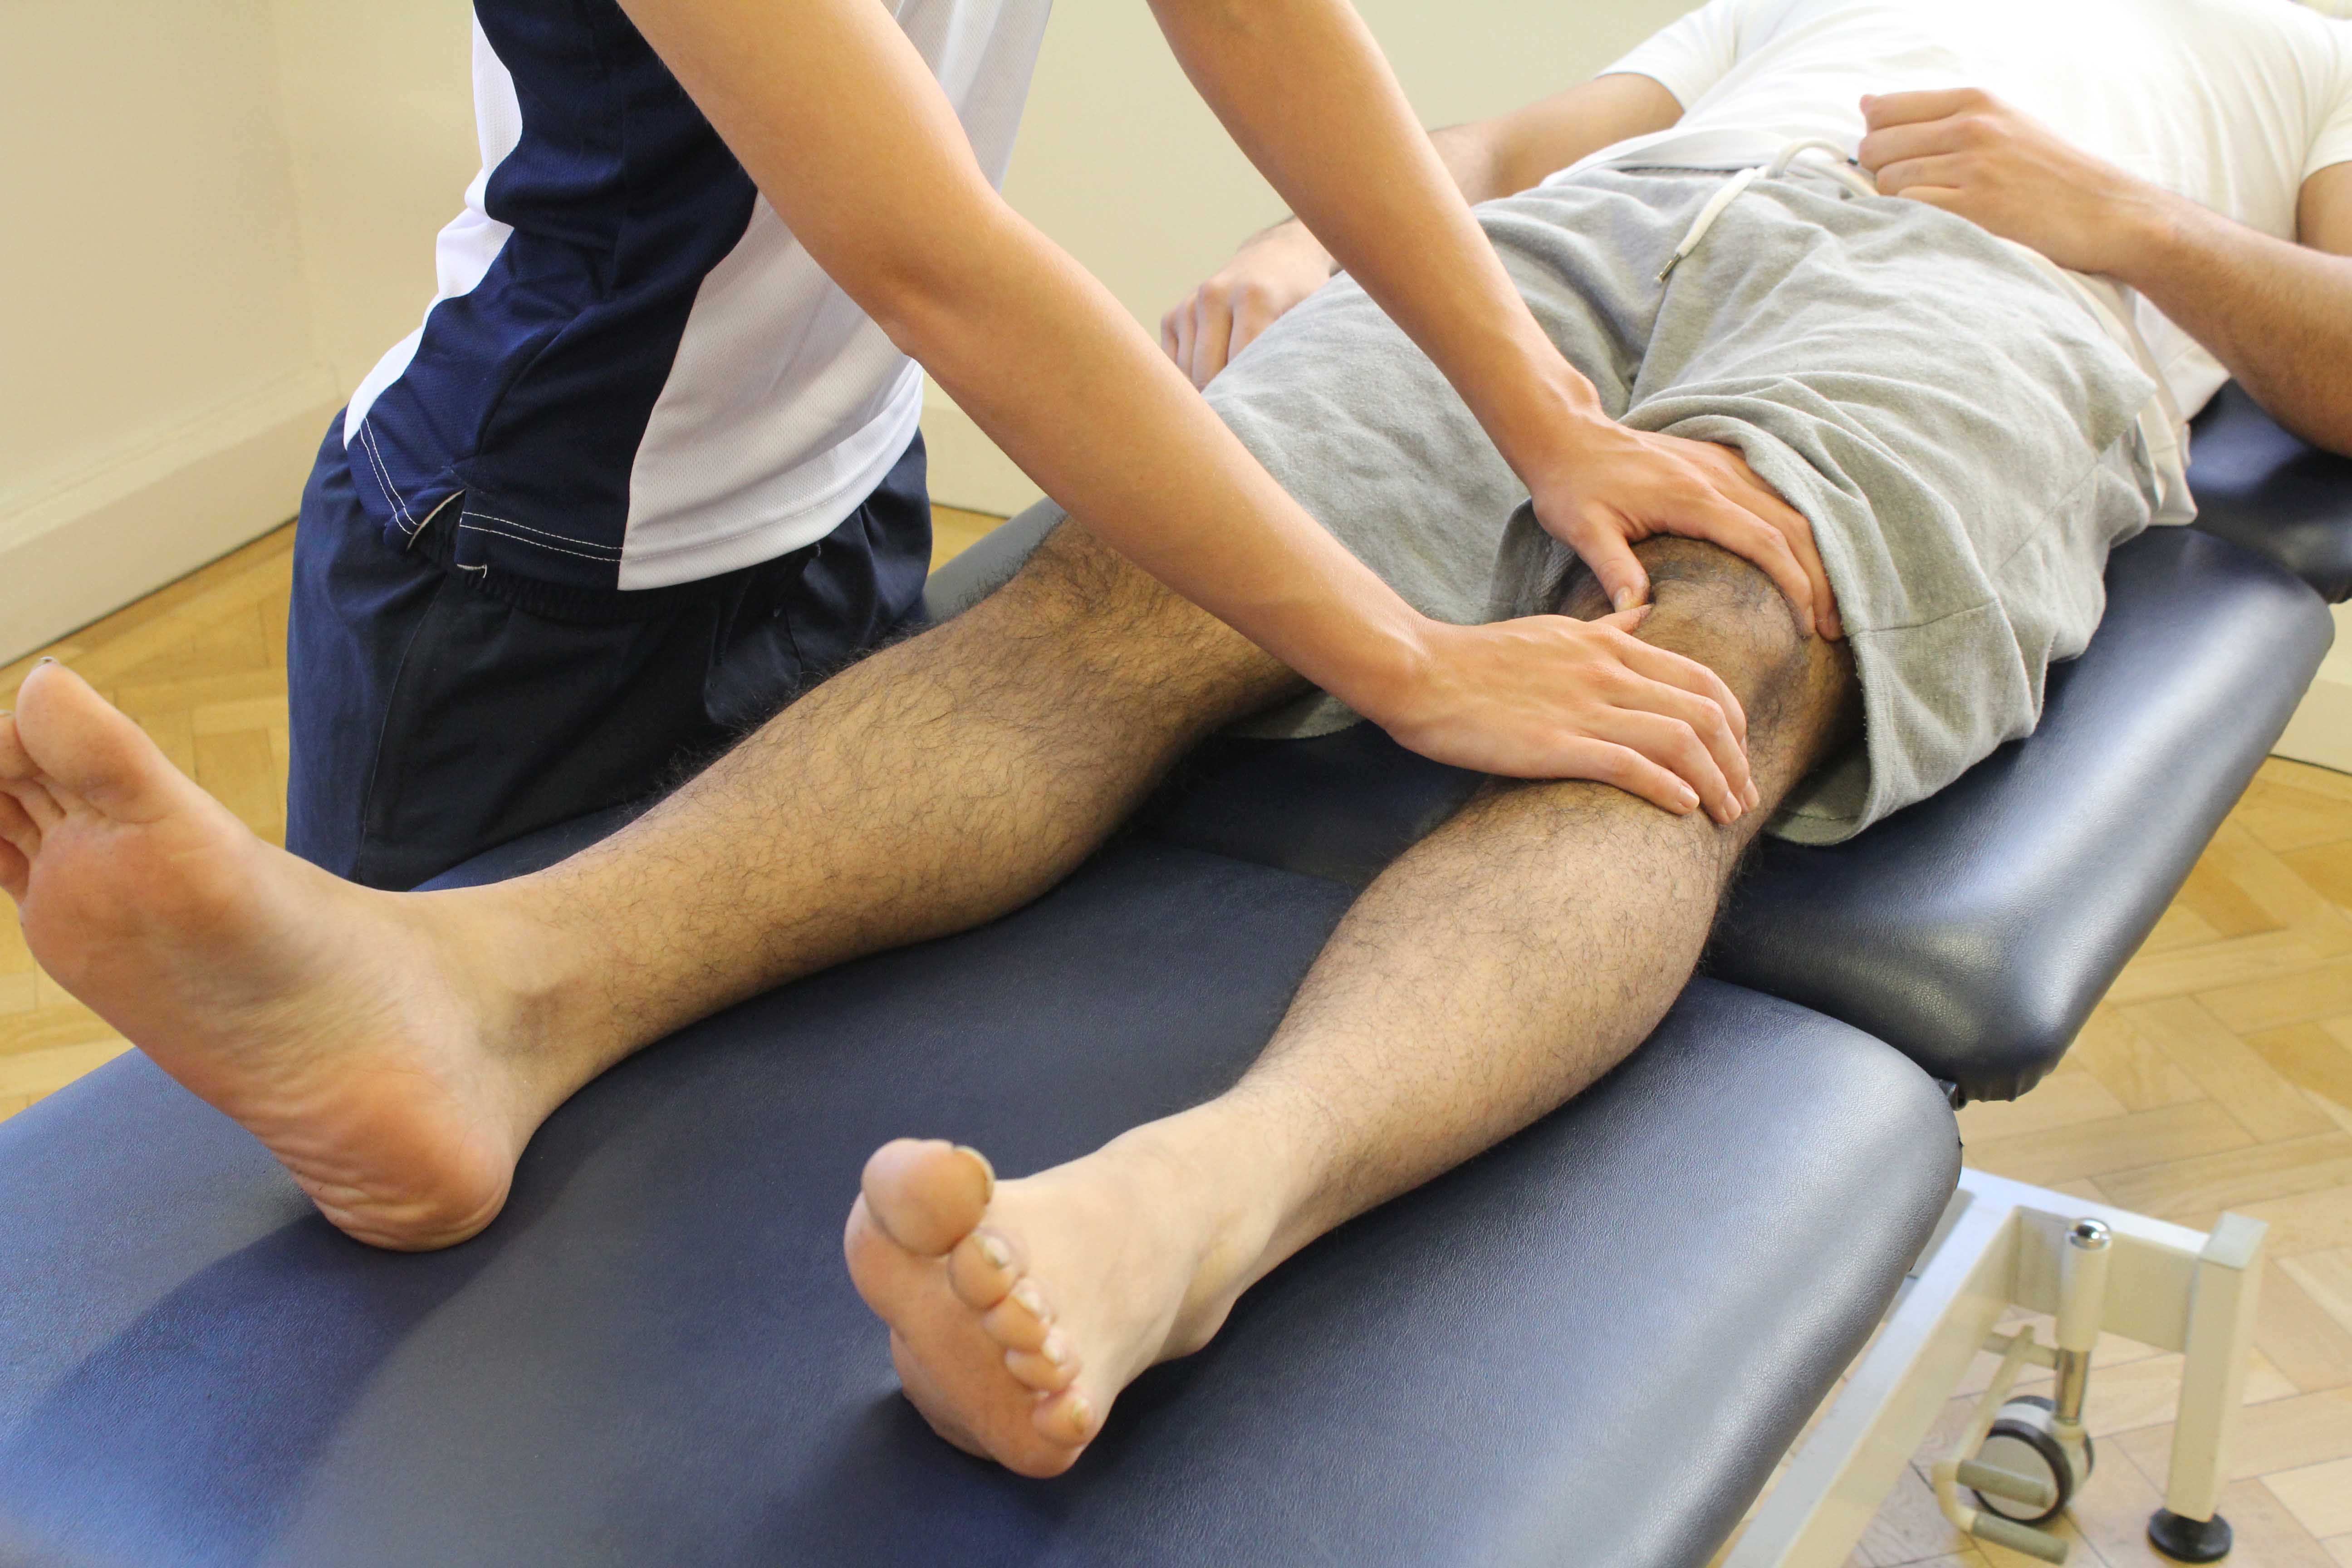 Soft tissue massage and mobilisations of the patella to disperse swelling from the knee joint